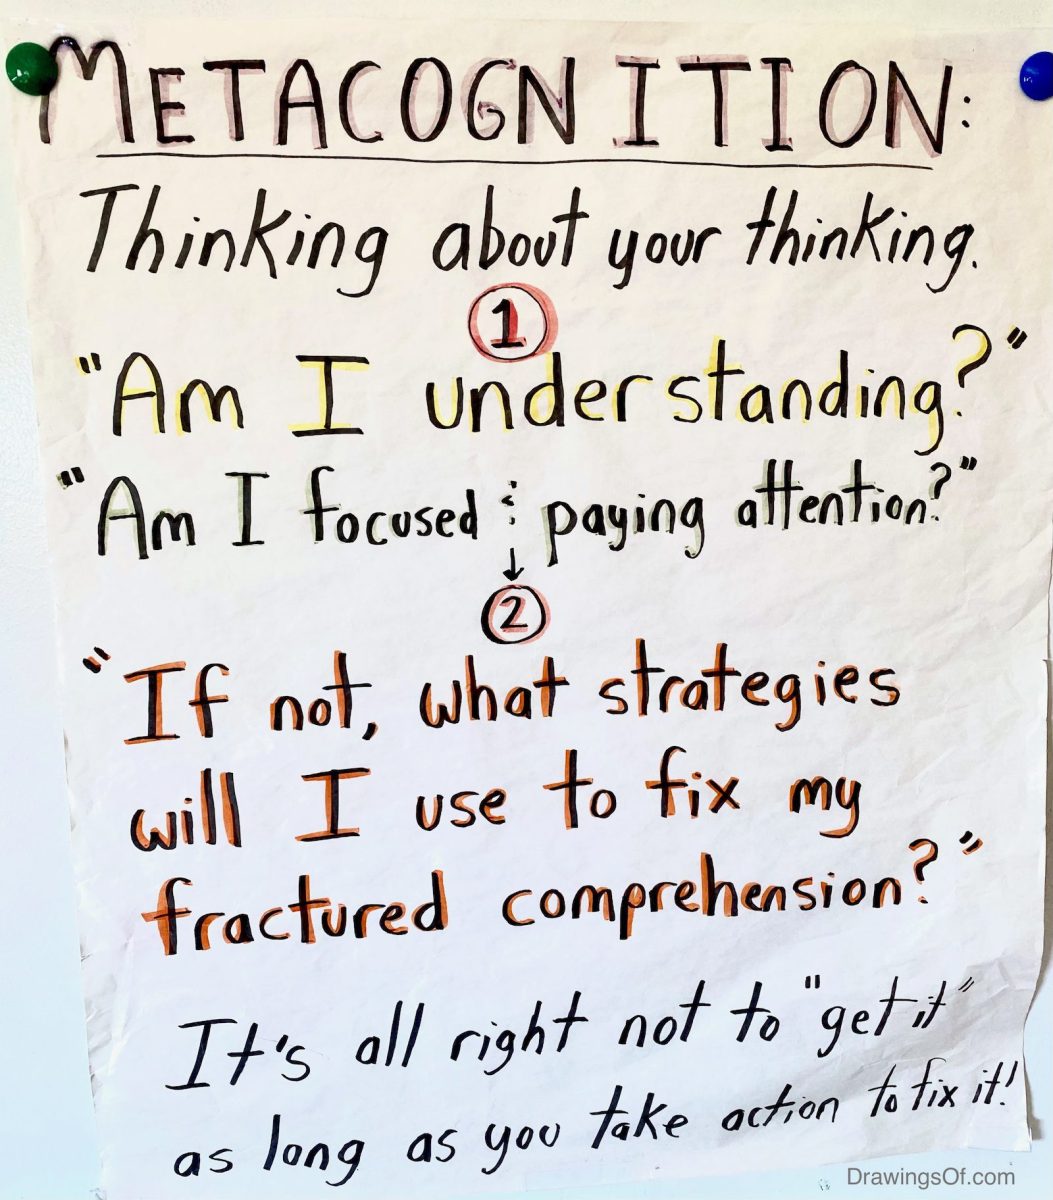 Metacognition wall anchor chart